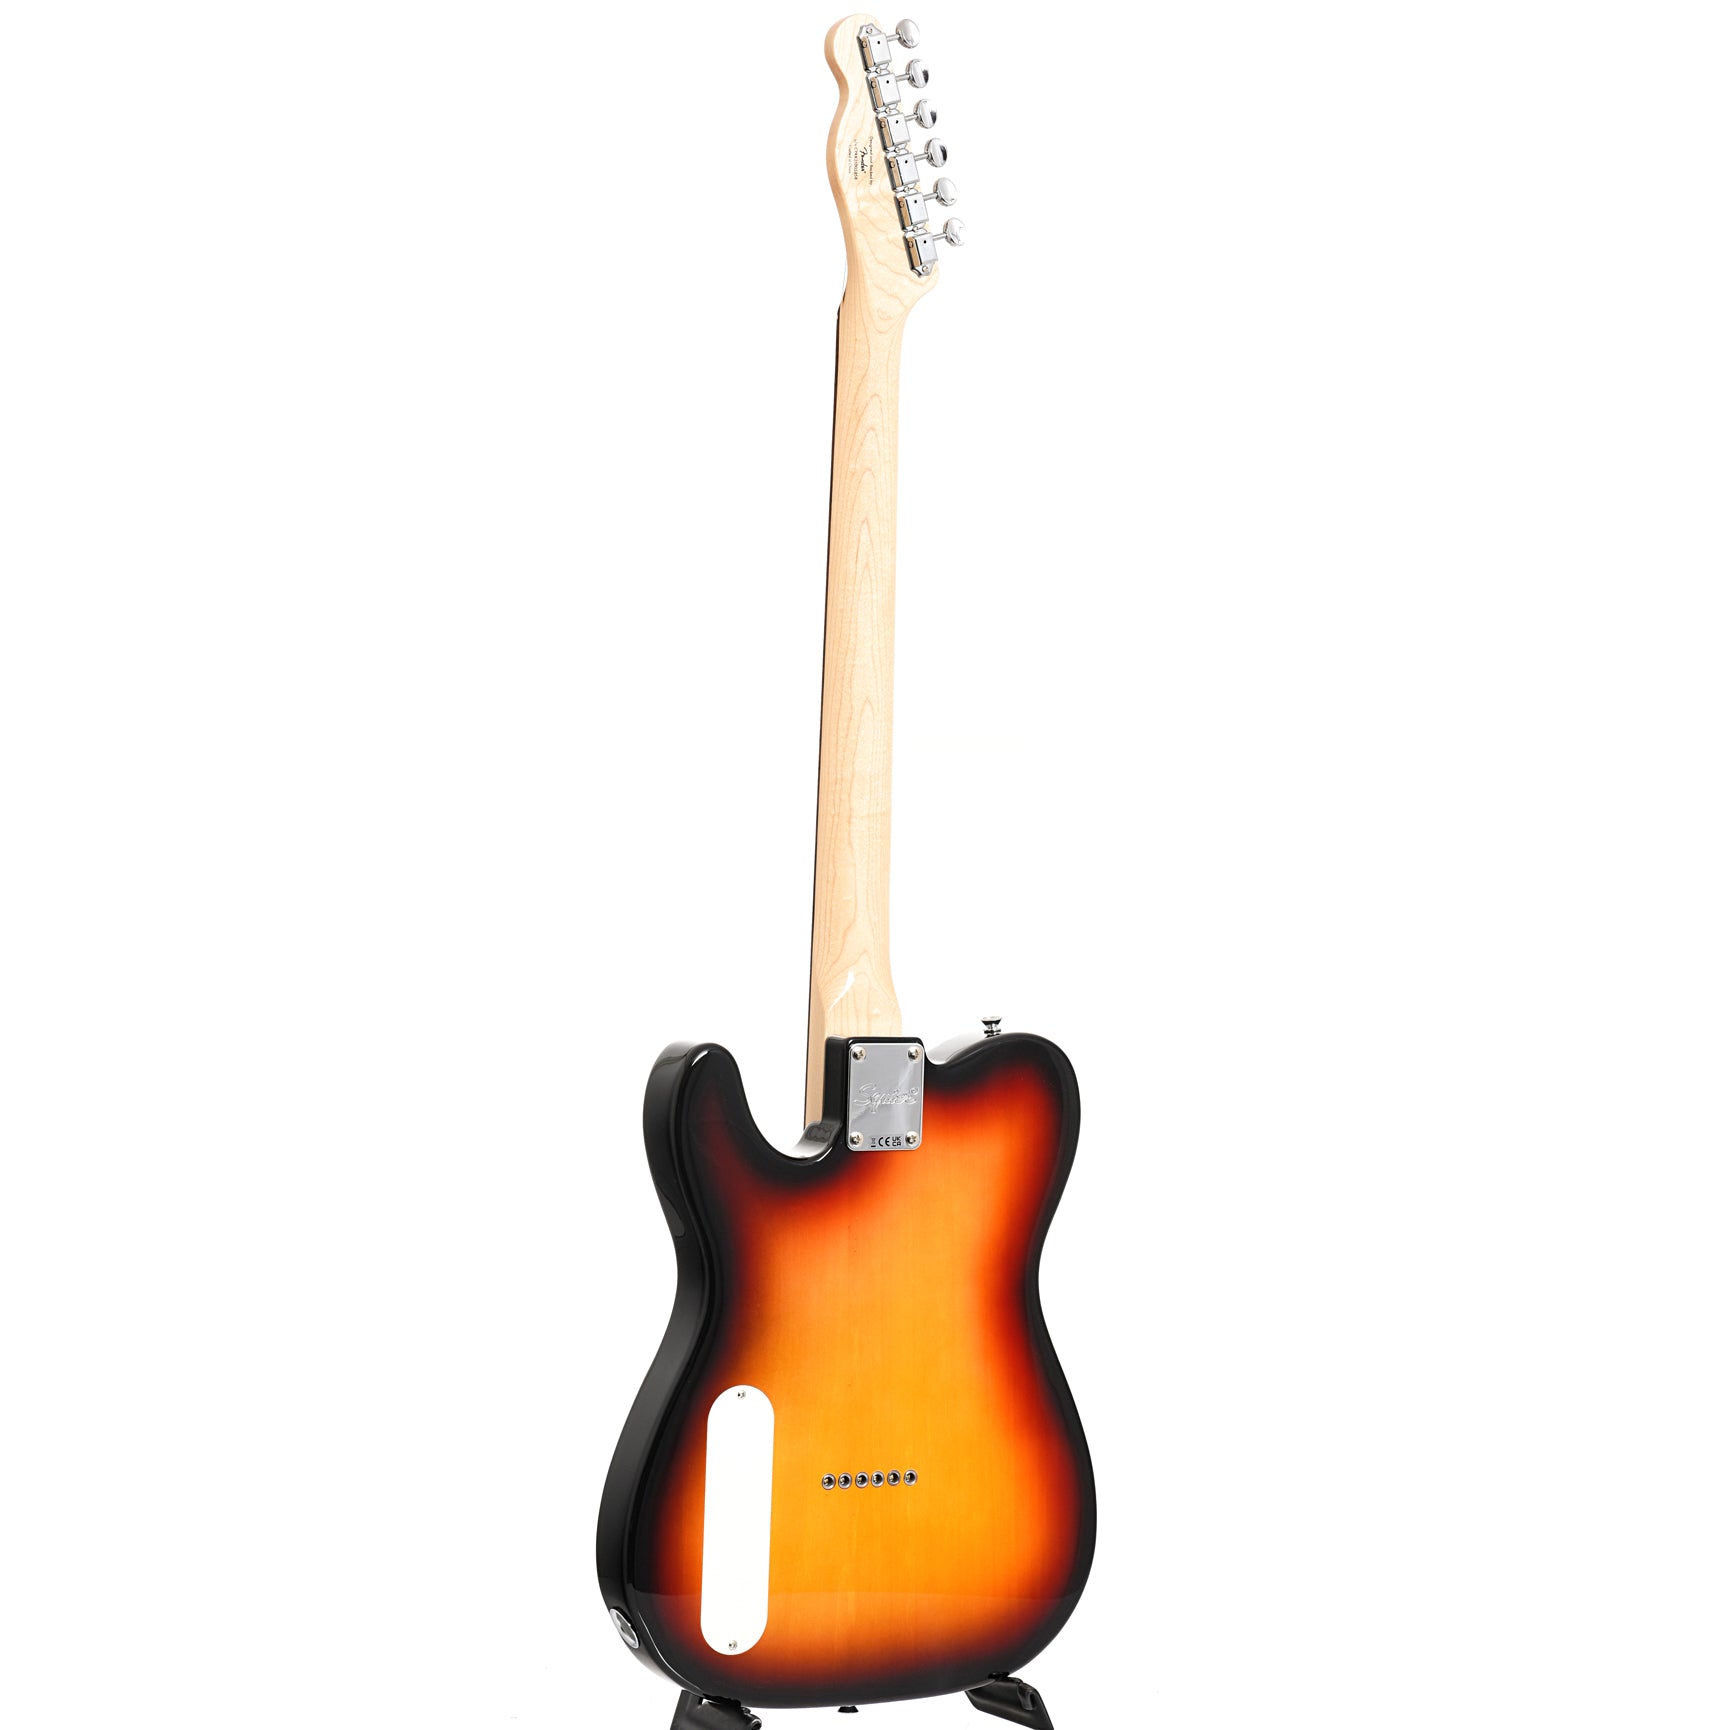 Image 12 of Squier Paranormal Baritone Cabronita Telecaster, 3-Color Sunburst - SKU# SPBARICT-3TS : Product Type Other : Elderly Instruments